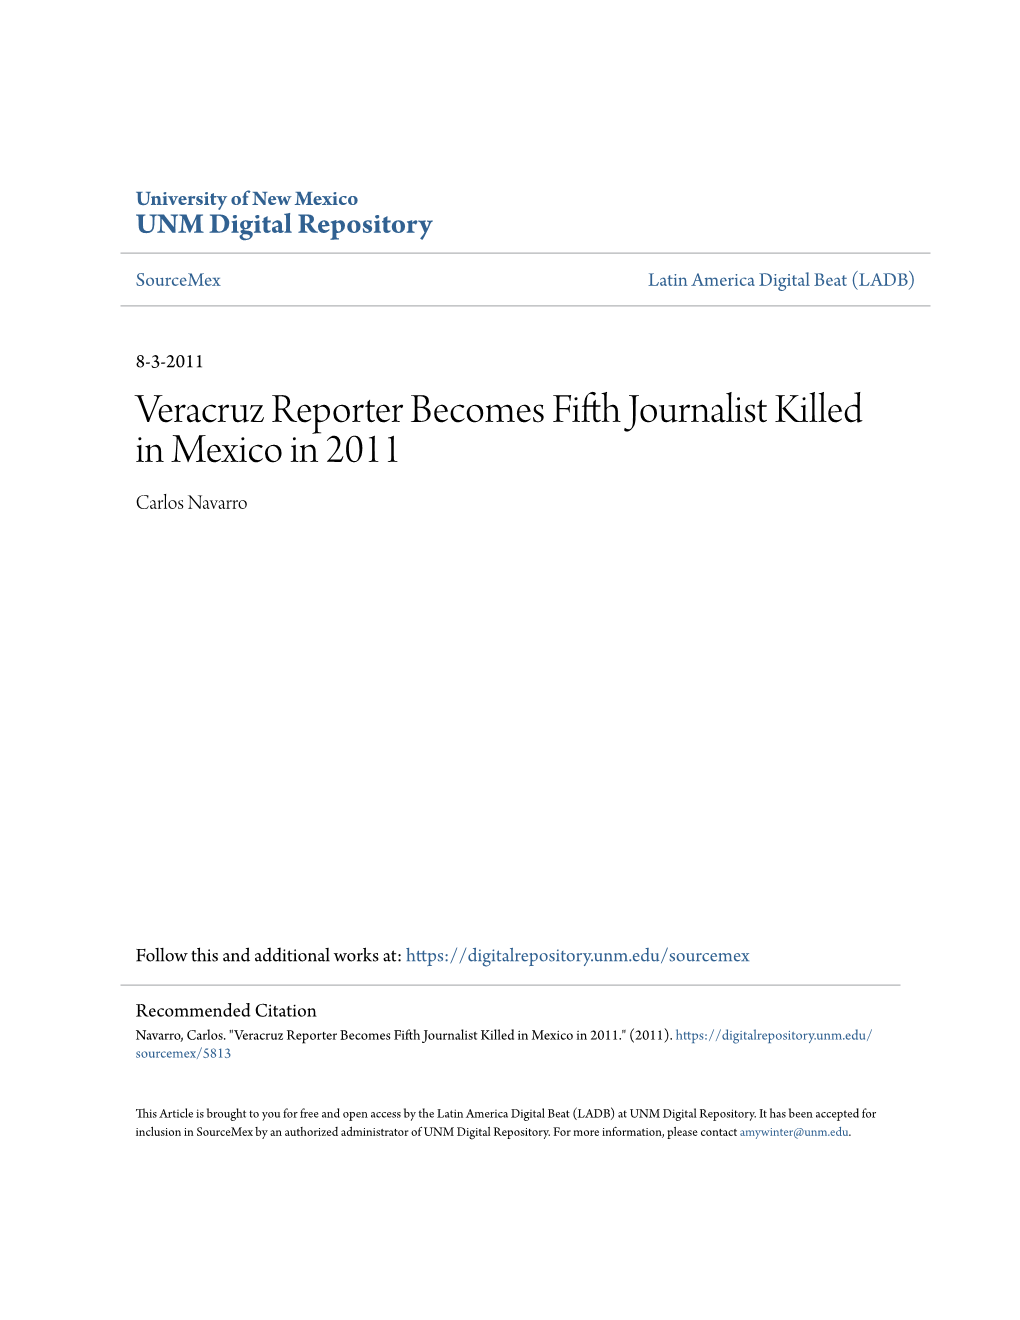 Veracruz Reporter Becomes Fifth Journalist Killed in Mexico in 2011 by Carlos Navarro Category/Department: Human Rights Published: Wednesday, August 3, 2011